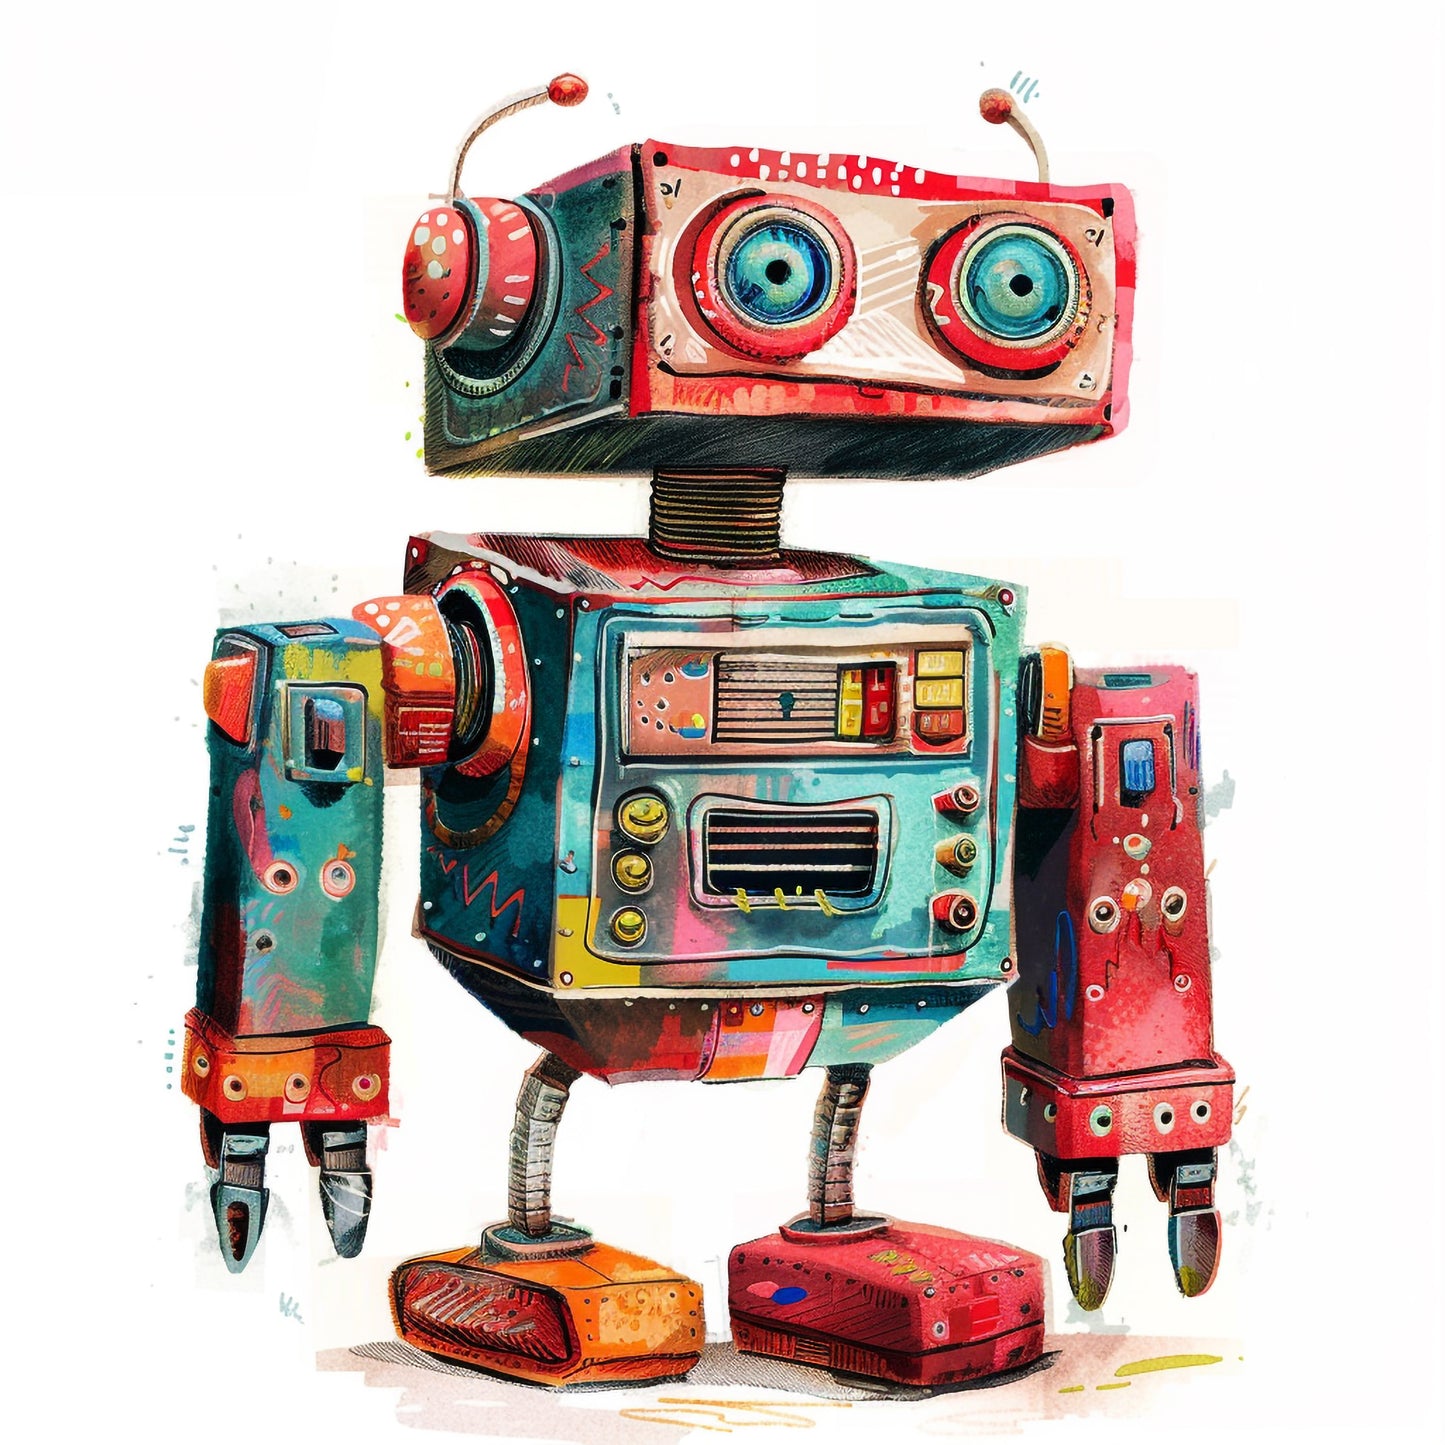 Colorful Vintage Toy Robot on a Pure White Background